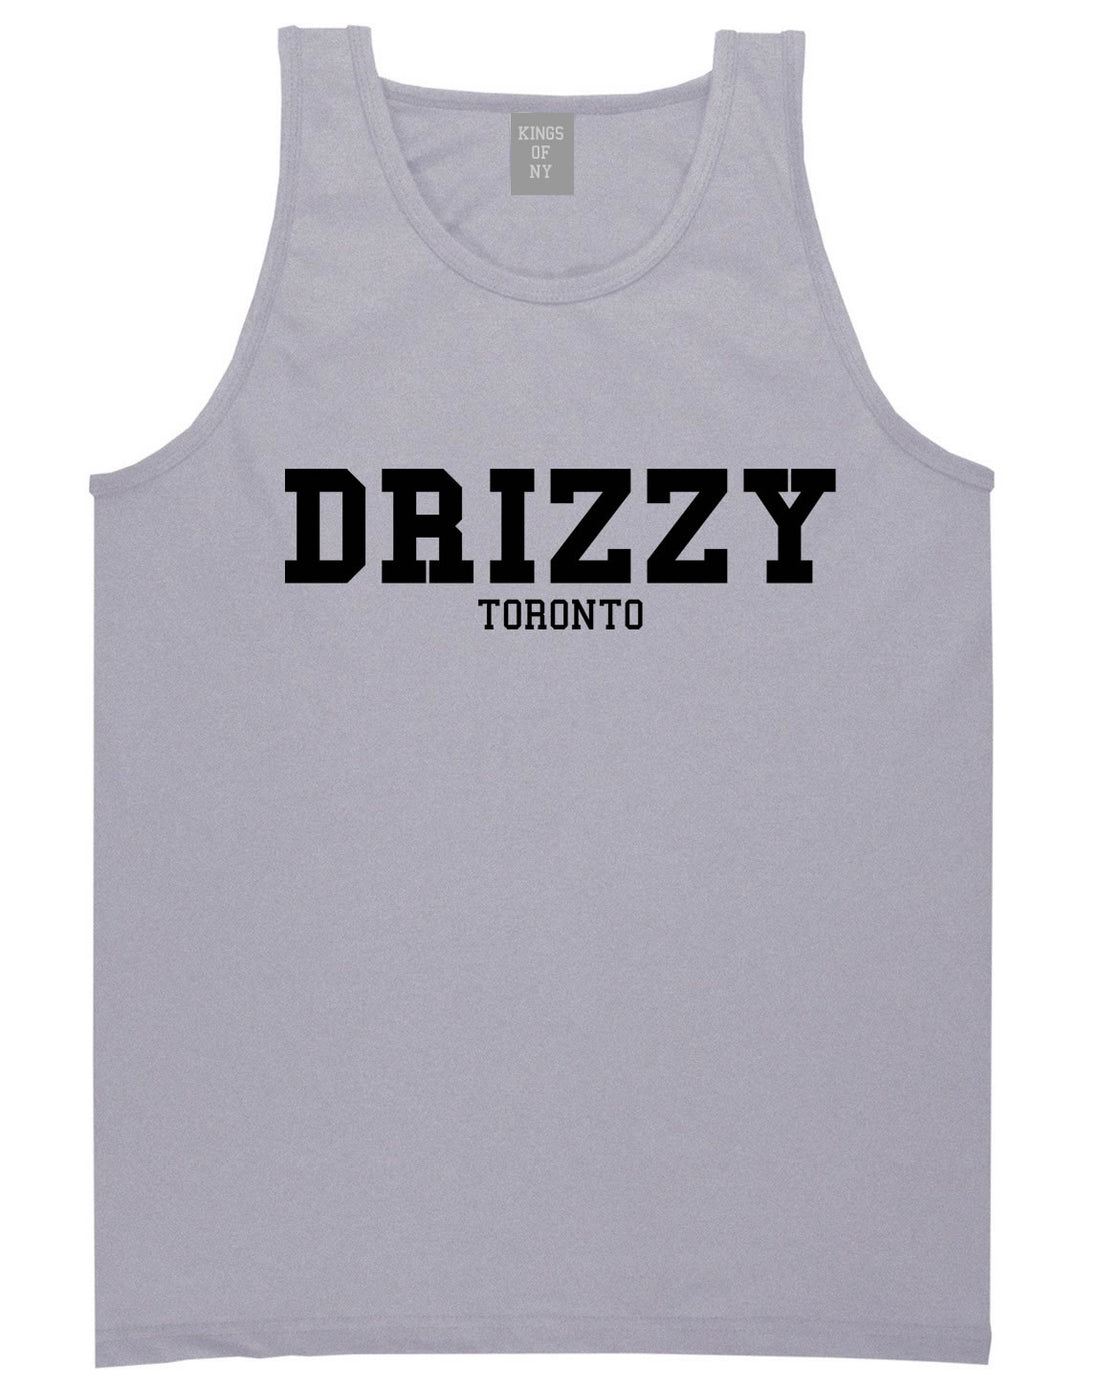 Drizzy Toronto Canada Tank Top in Grey by Kings Of NY